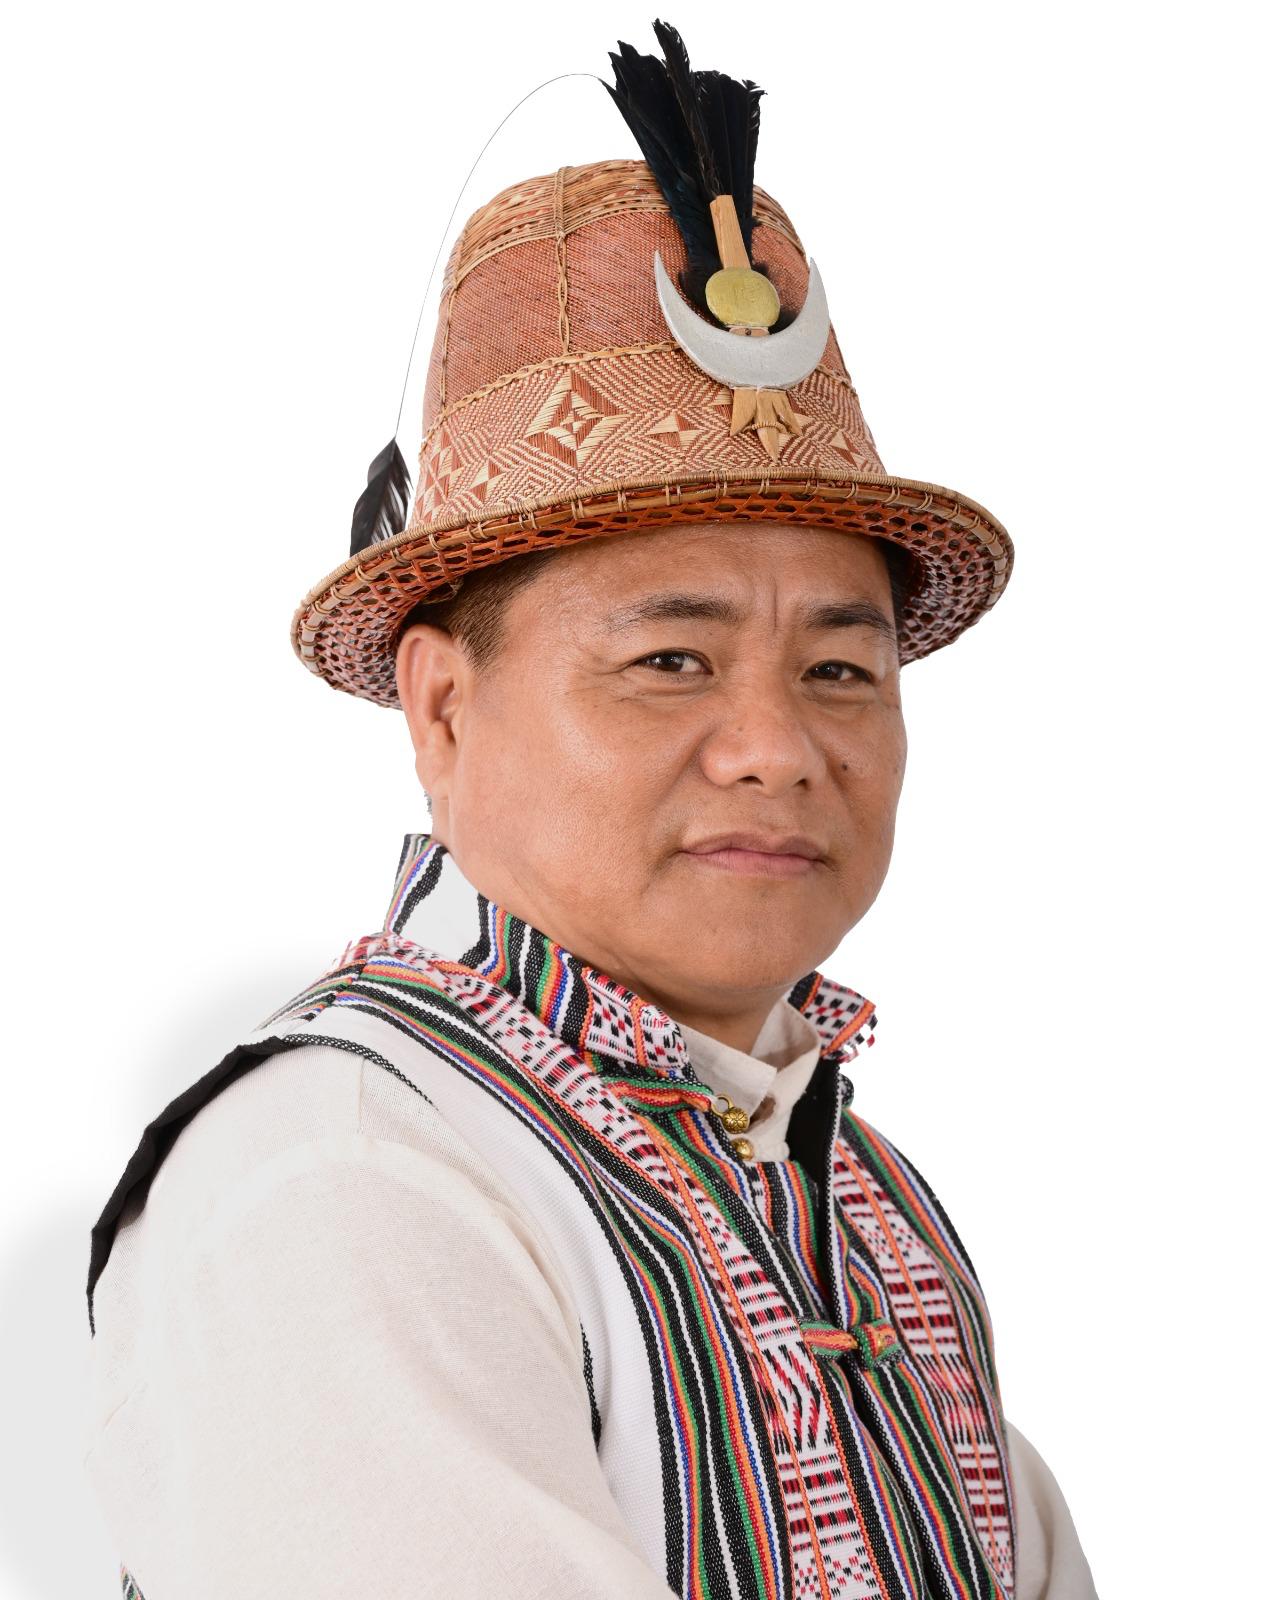 Forest Minister of Sikkim